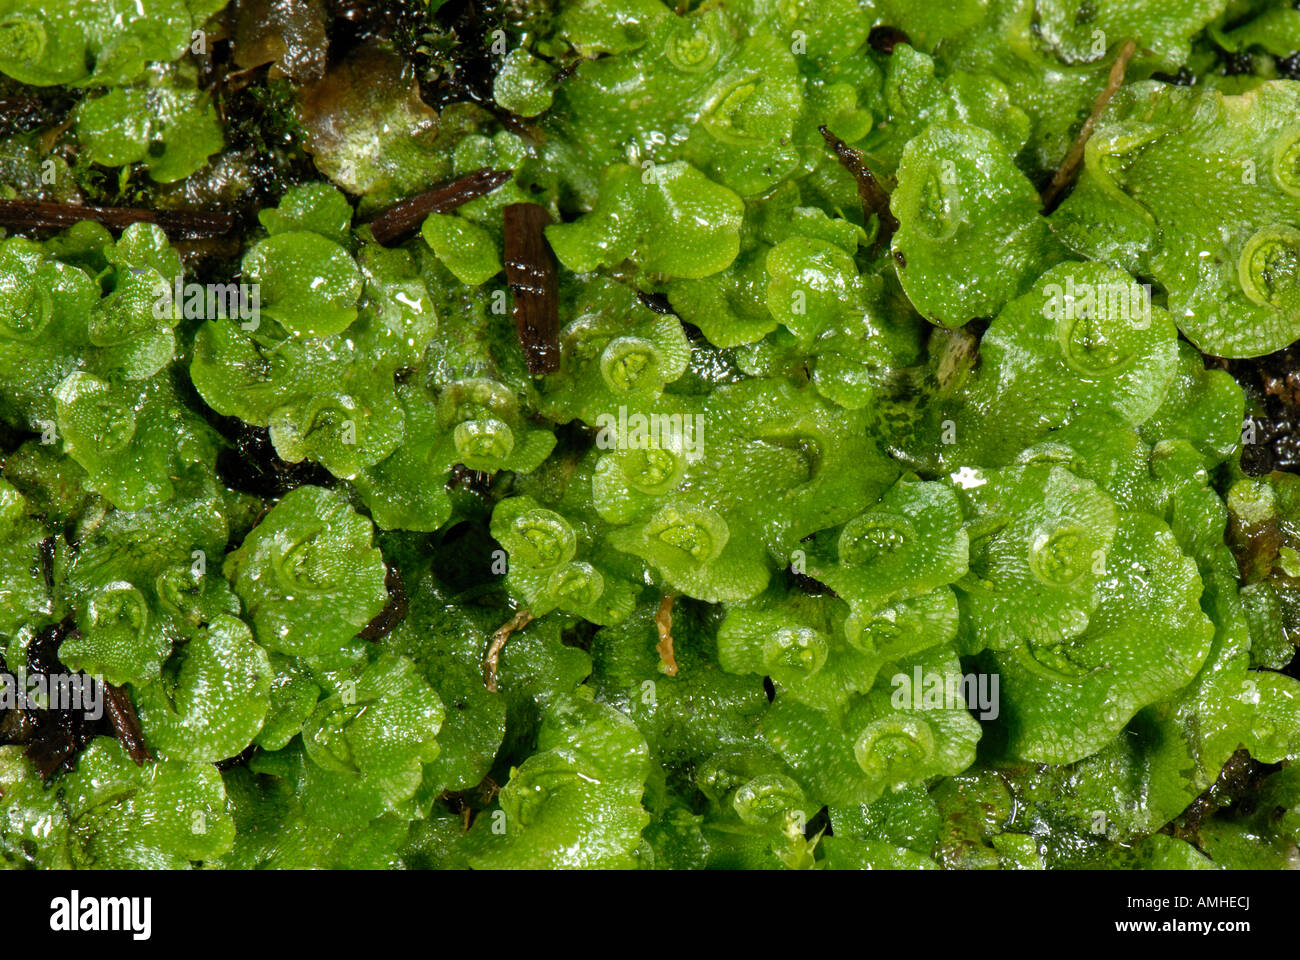 Liverworts Marchantia polymorpha on the soil surface of a pot plant Stock Photo